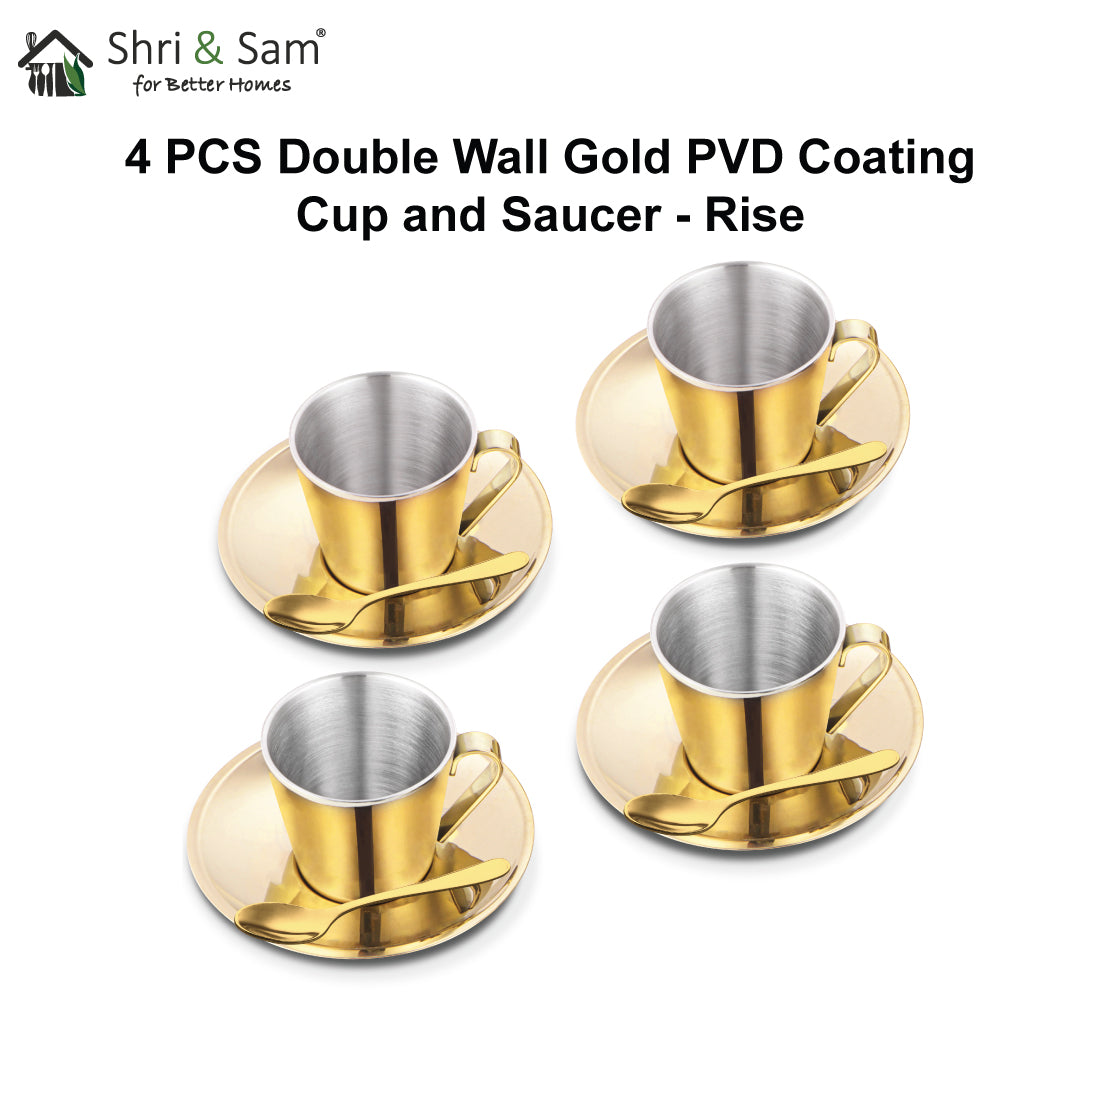 Stainless Steel 4 PCS Double Wall Cup and Saucer with Gold PVD Coating Rise